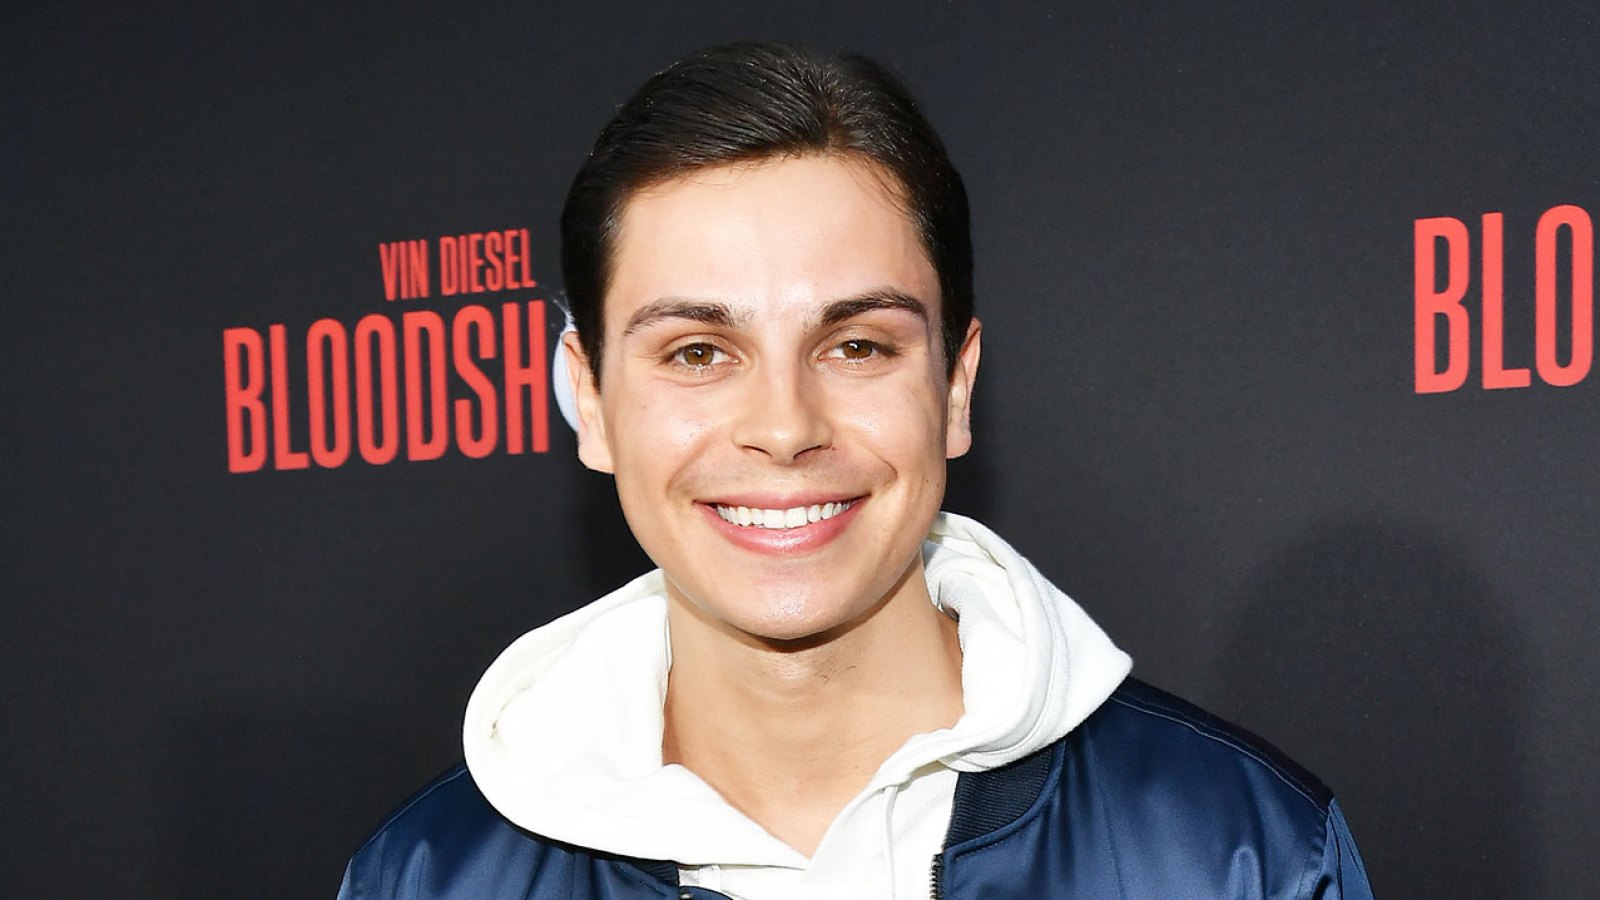 Jake T Austin Is Looking Forward to Getting Together With Wizards of Waverly Place Costars